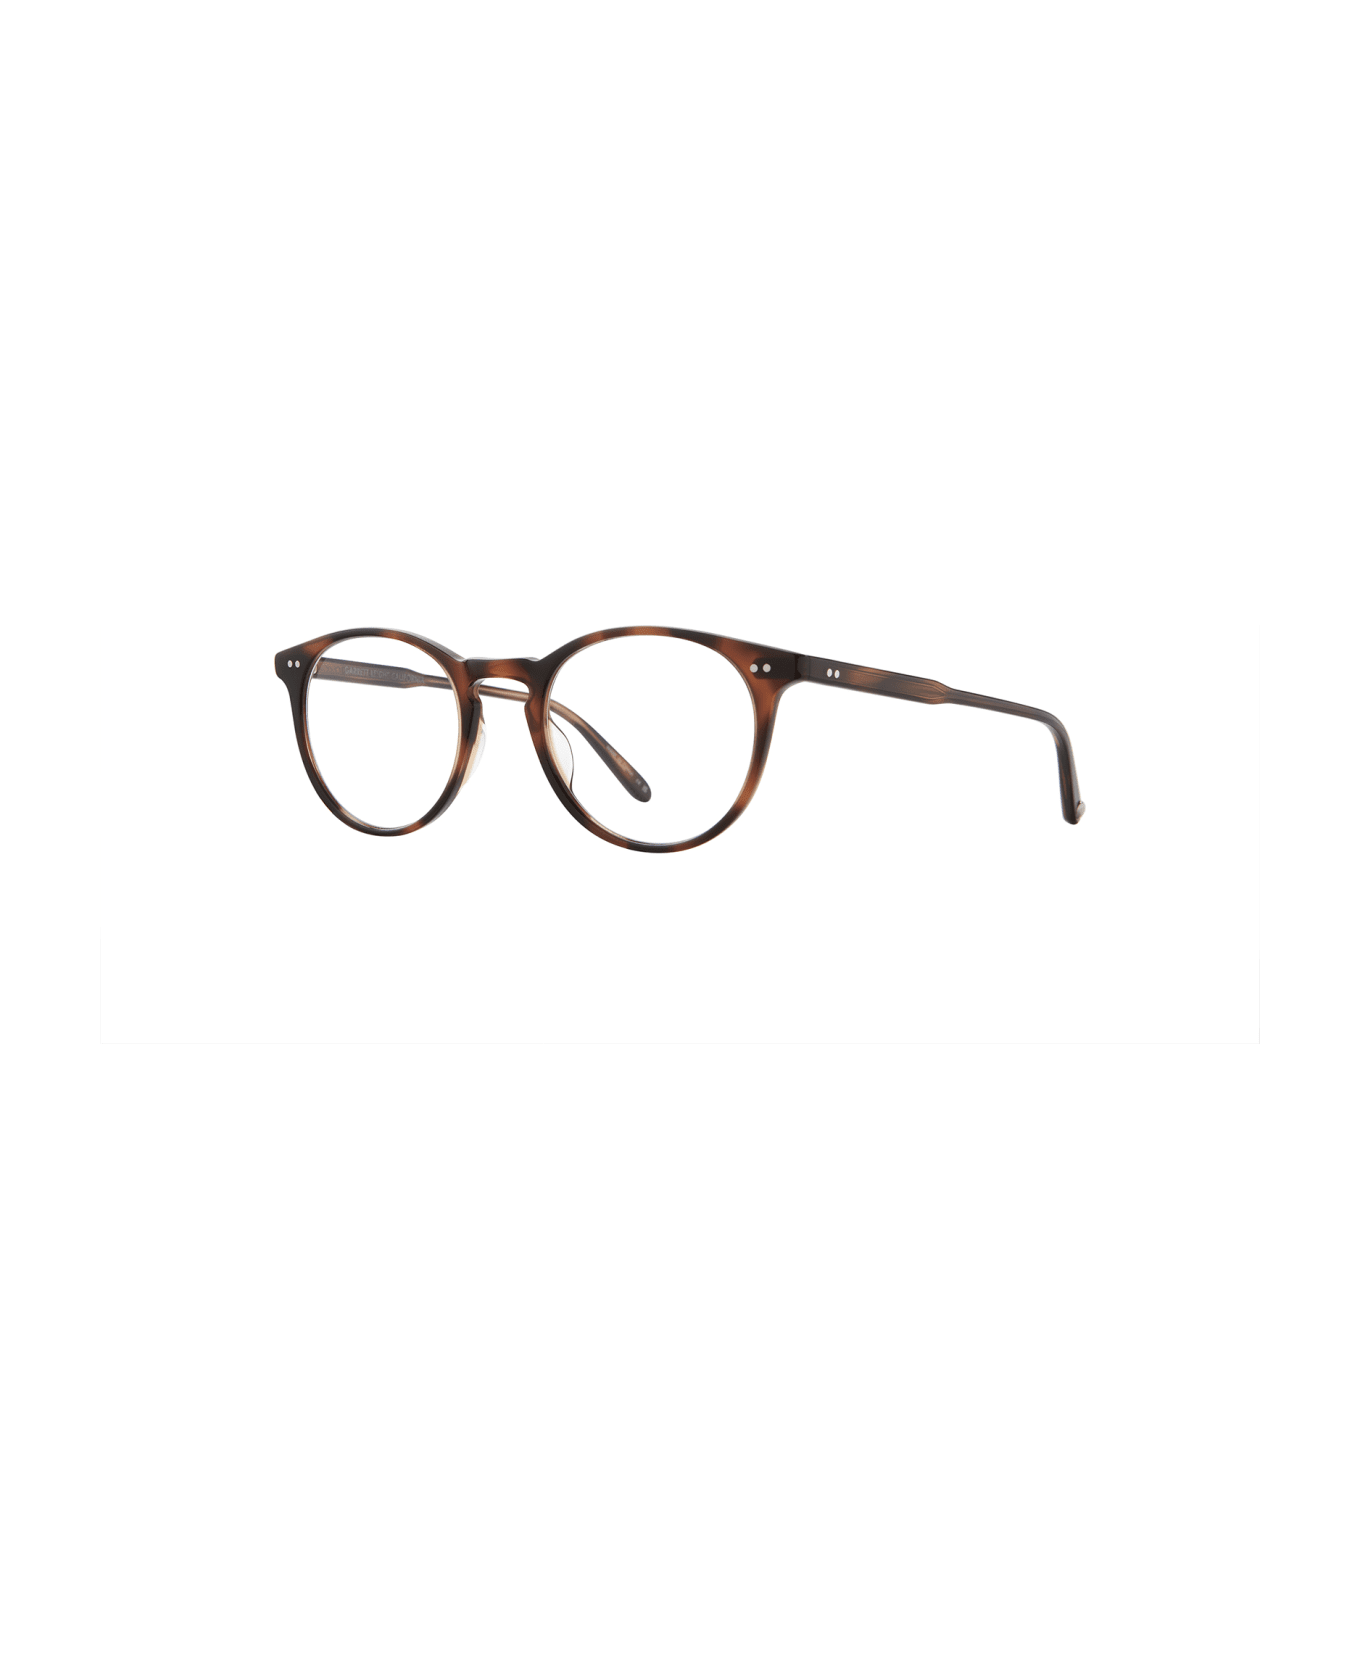 Garrett Leight Winward Spotted Brown Shell Glasses - Spotted Brown Shell アイウェア